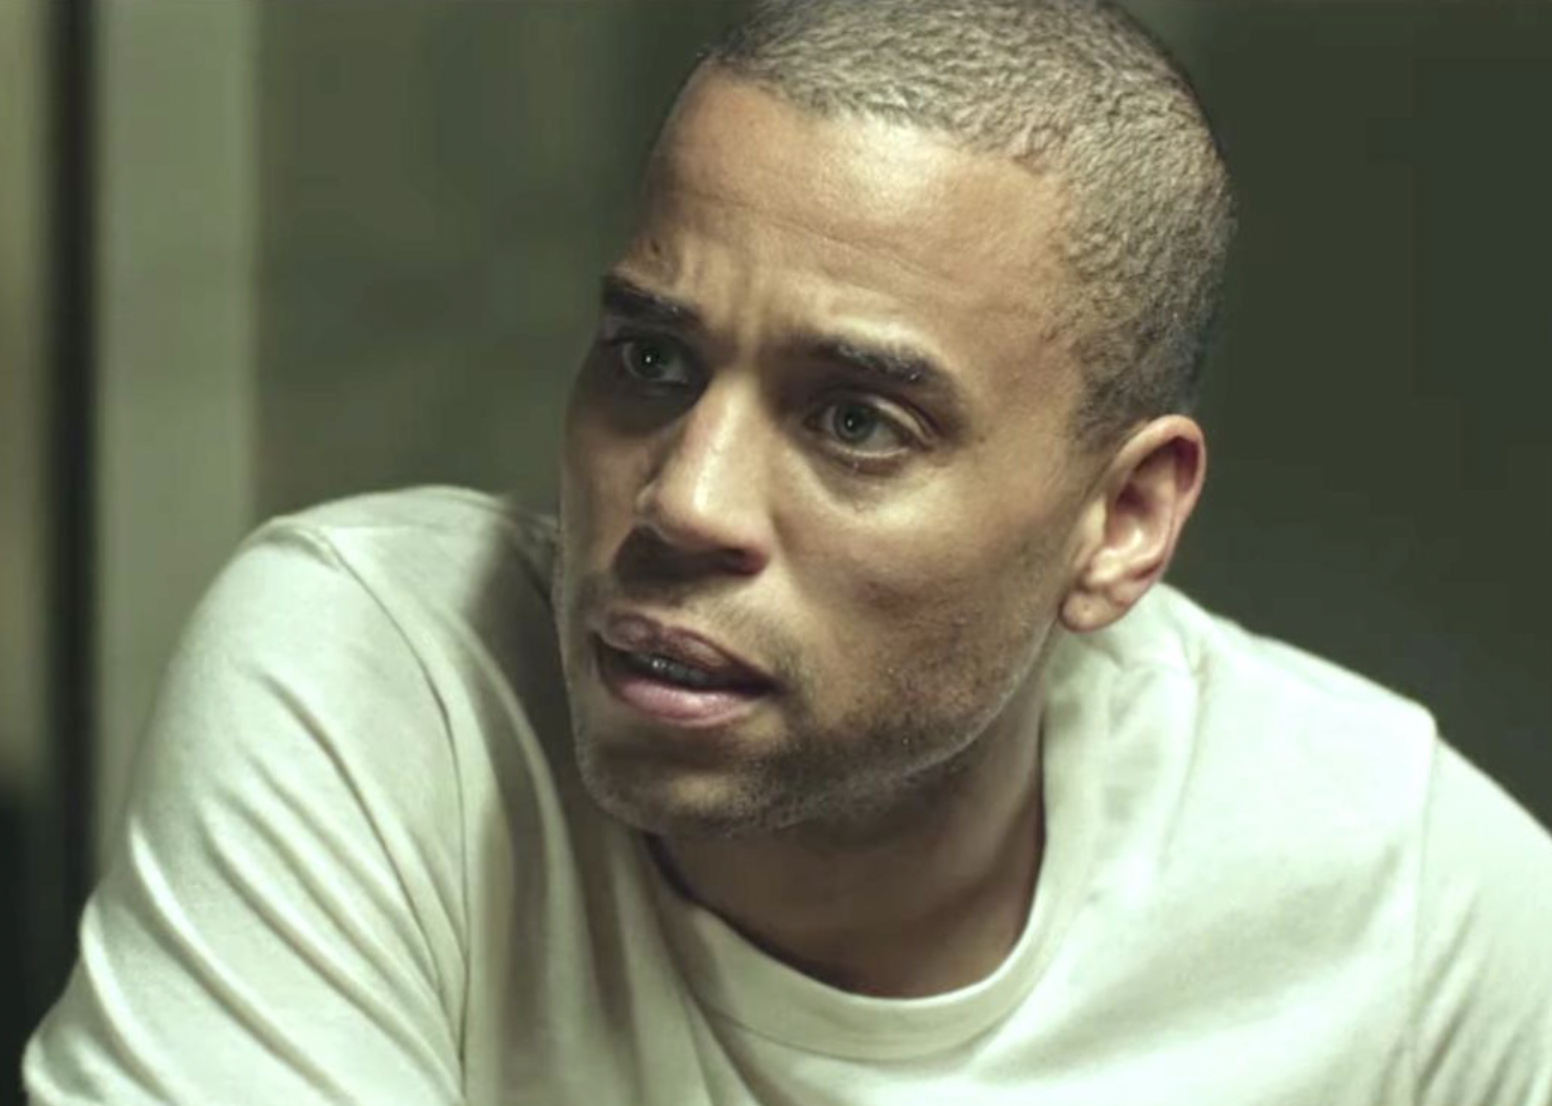 Michael Ealy in "Jacob's Ladder"